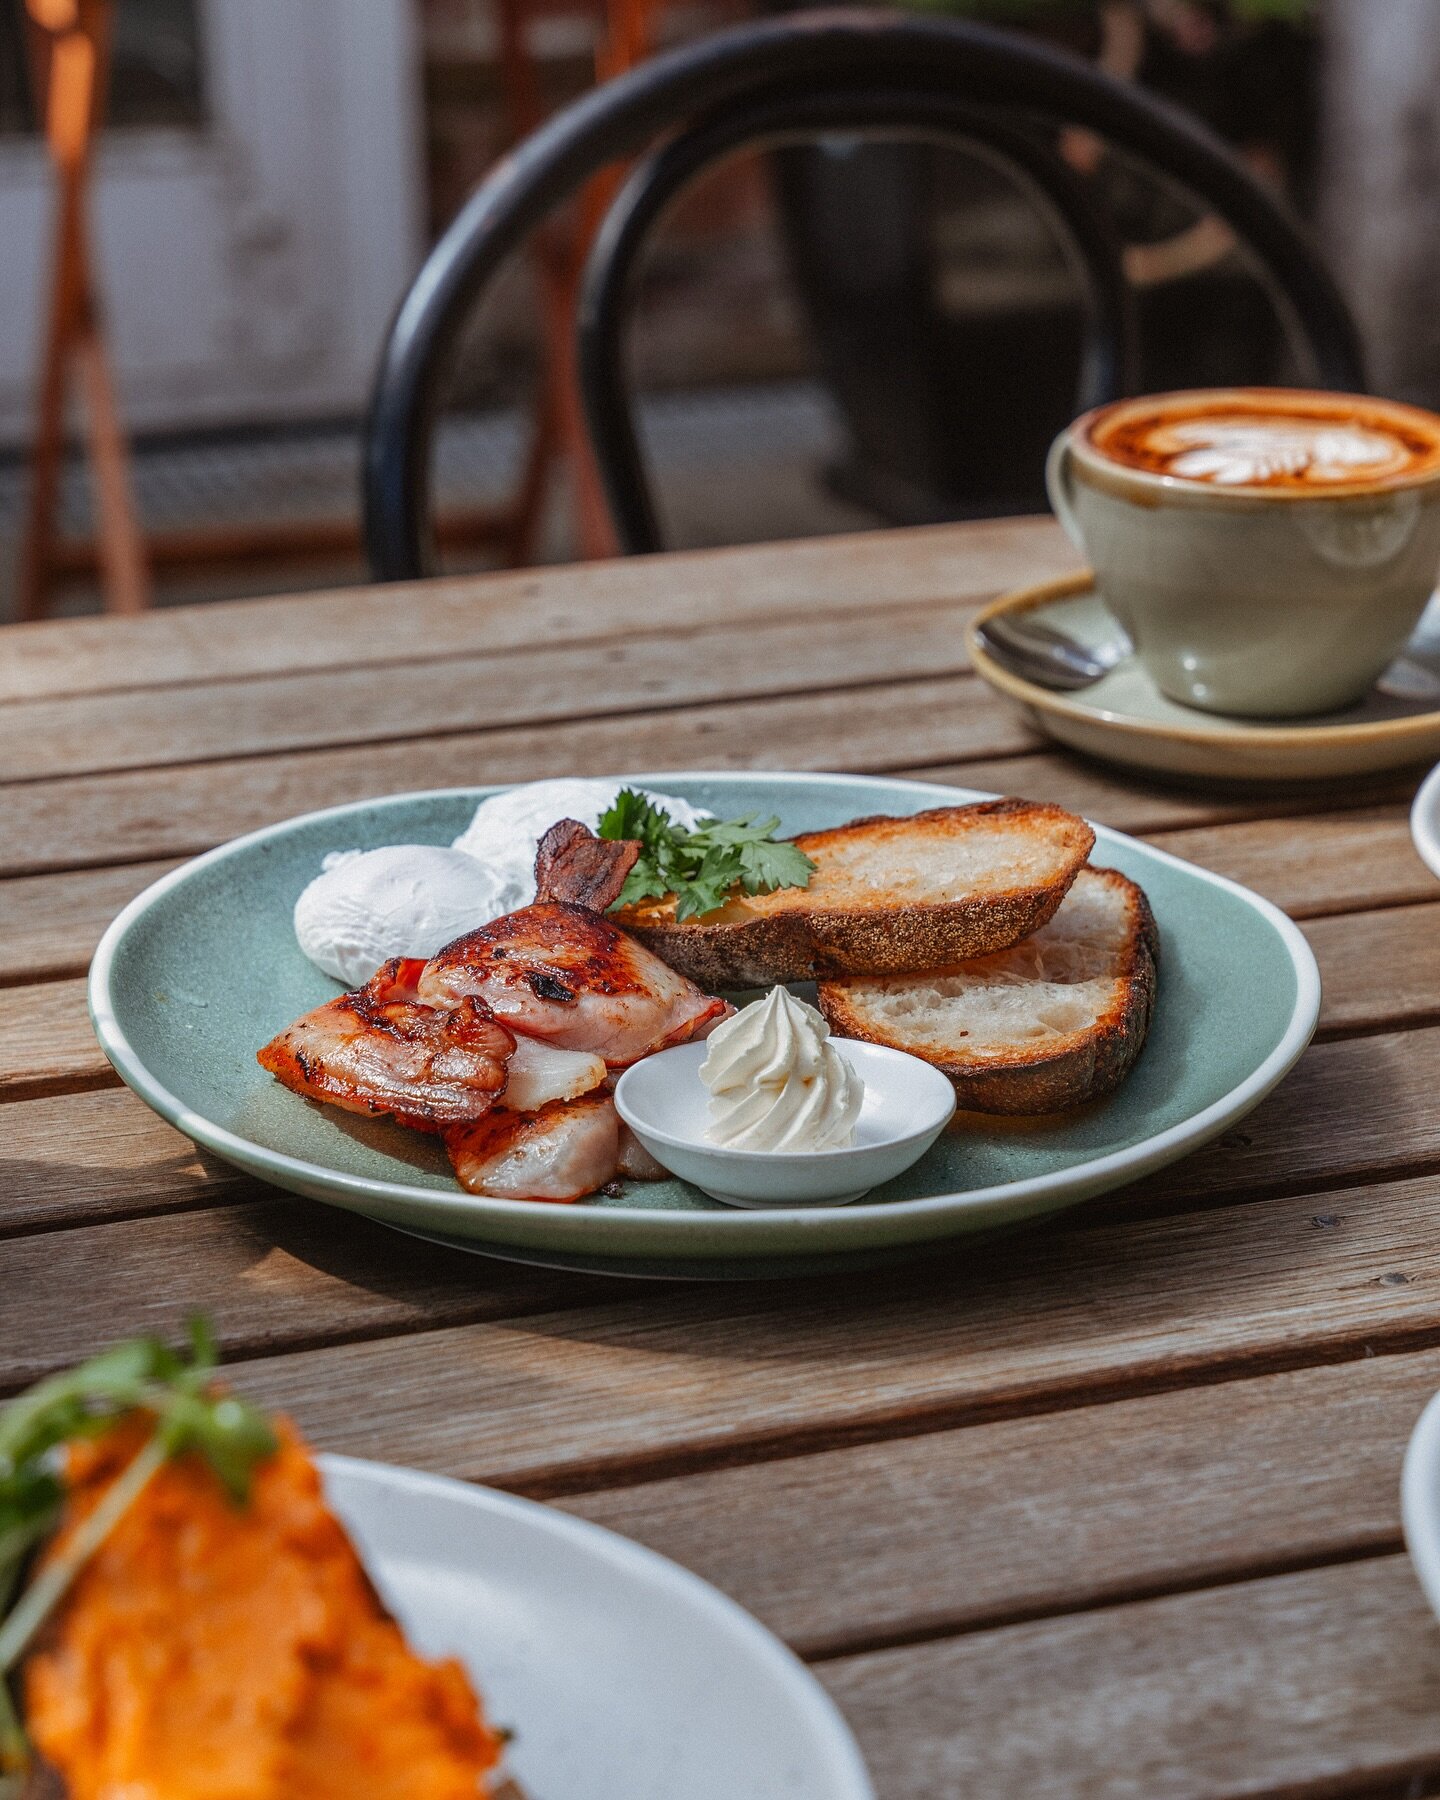 Good Morning Everyone 🌧️ 
Stay safe with all of this rain! We are still open with plenty of space for a hot breakfast &amp; a cuppa ☕️